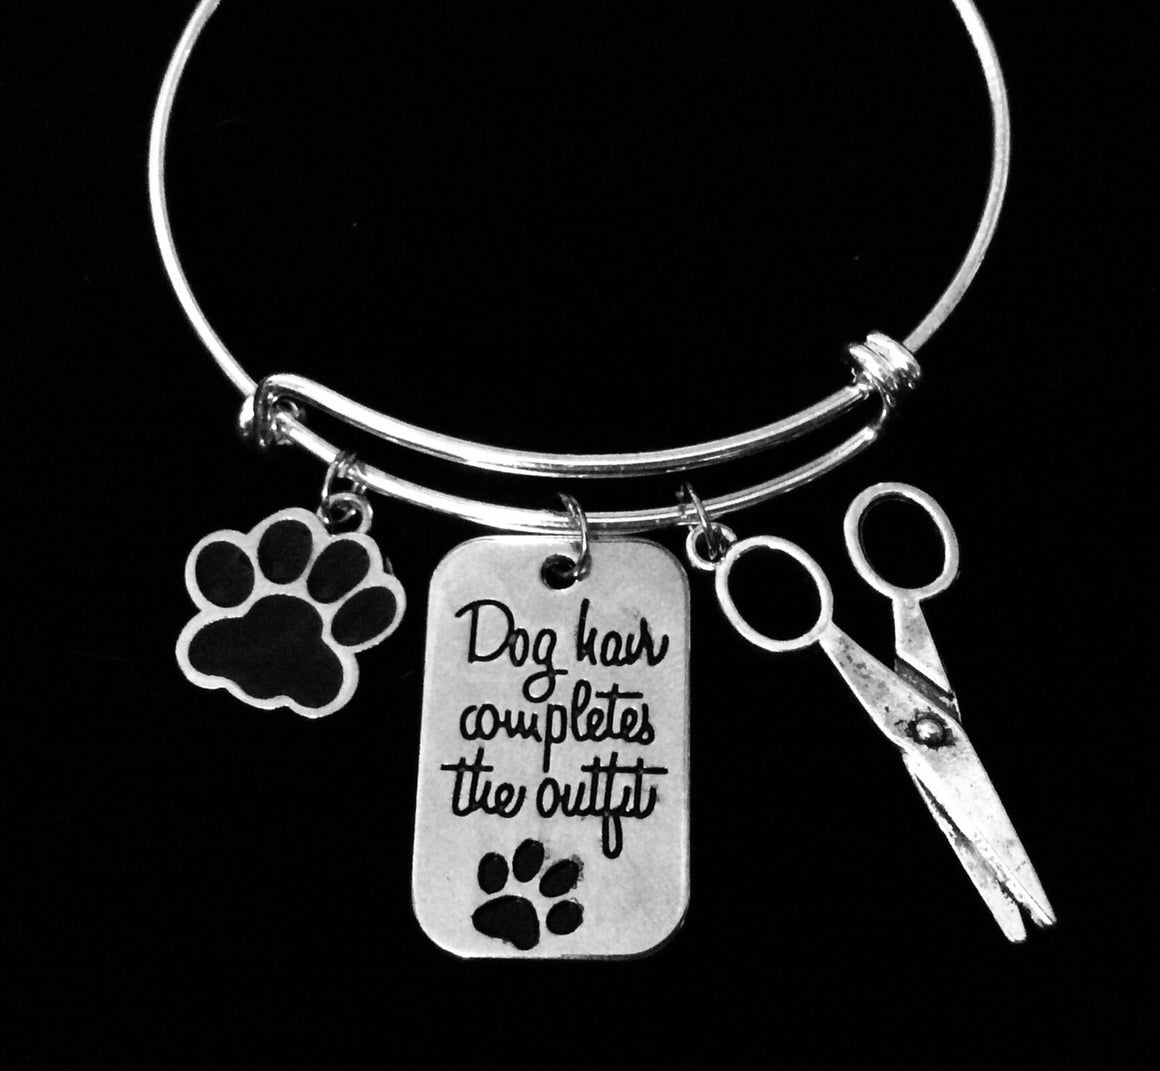 Dog Groomer Gift Dog Hair Completes the Outfit Expandable Charm Bracelet One Size Fits All